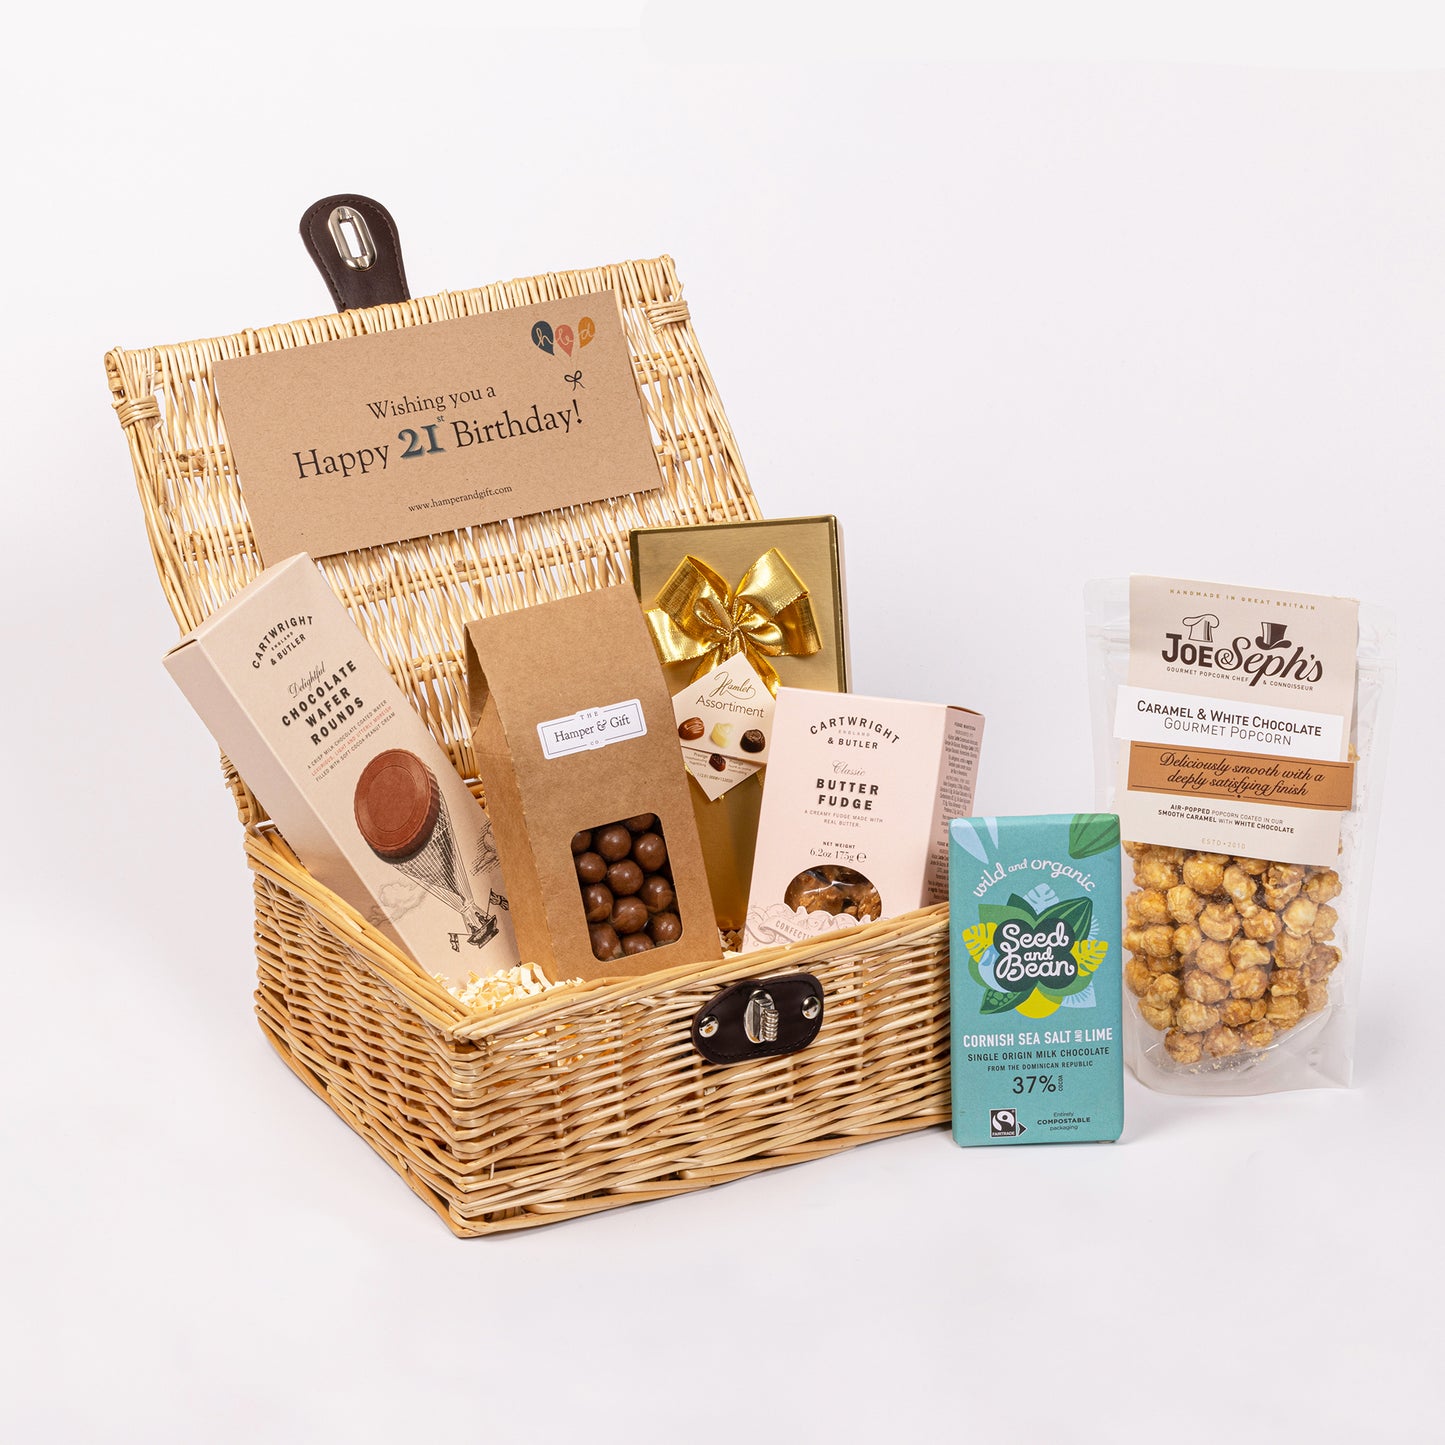 21st Birthday Chocolate & Fudge Hamper filled with a variety of chocolate, fudge, biscuit and gourmet popcorn